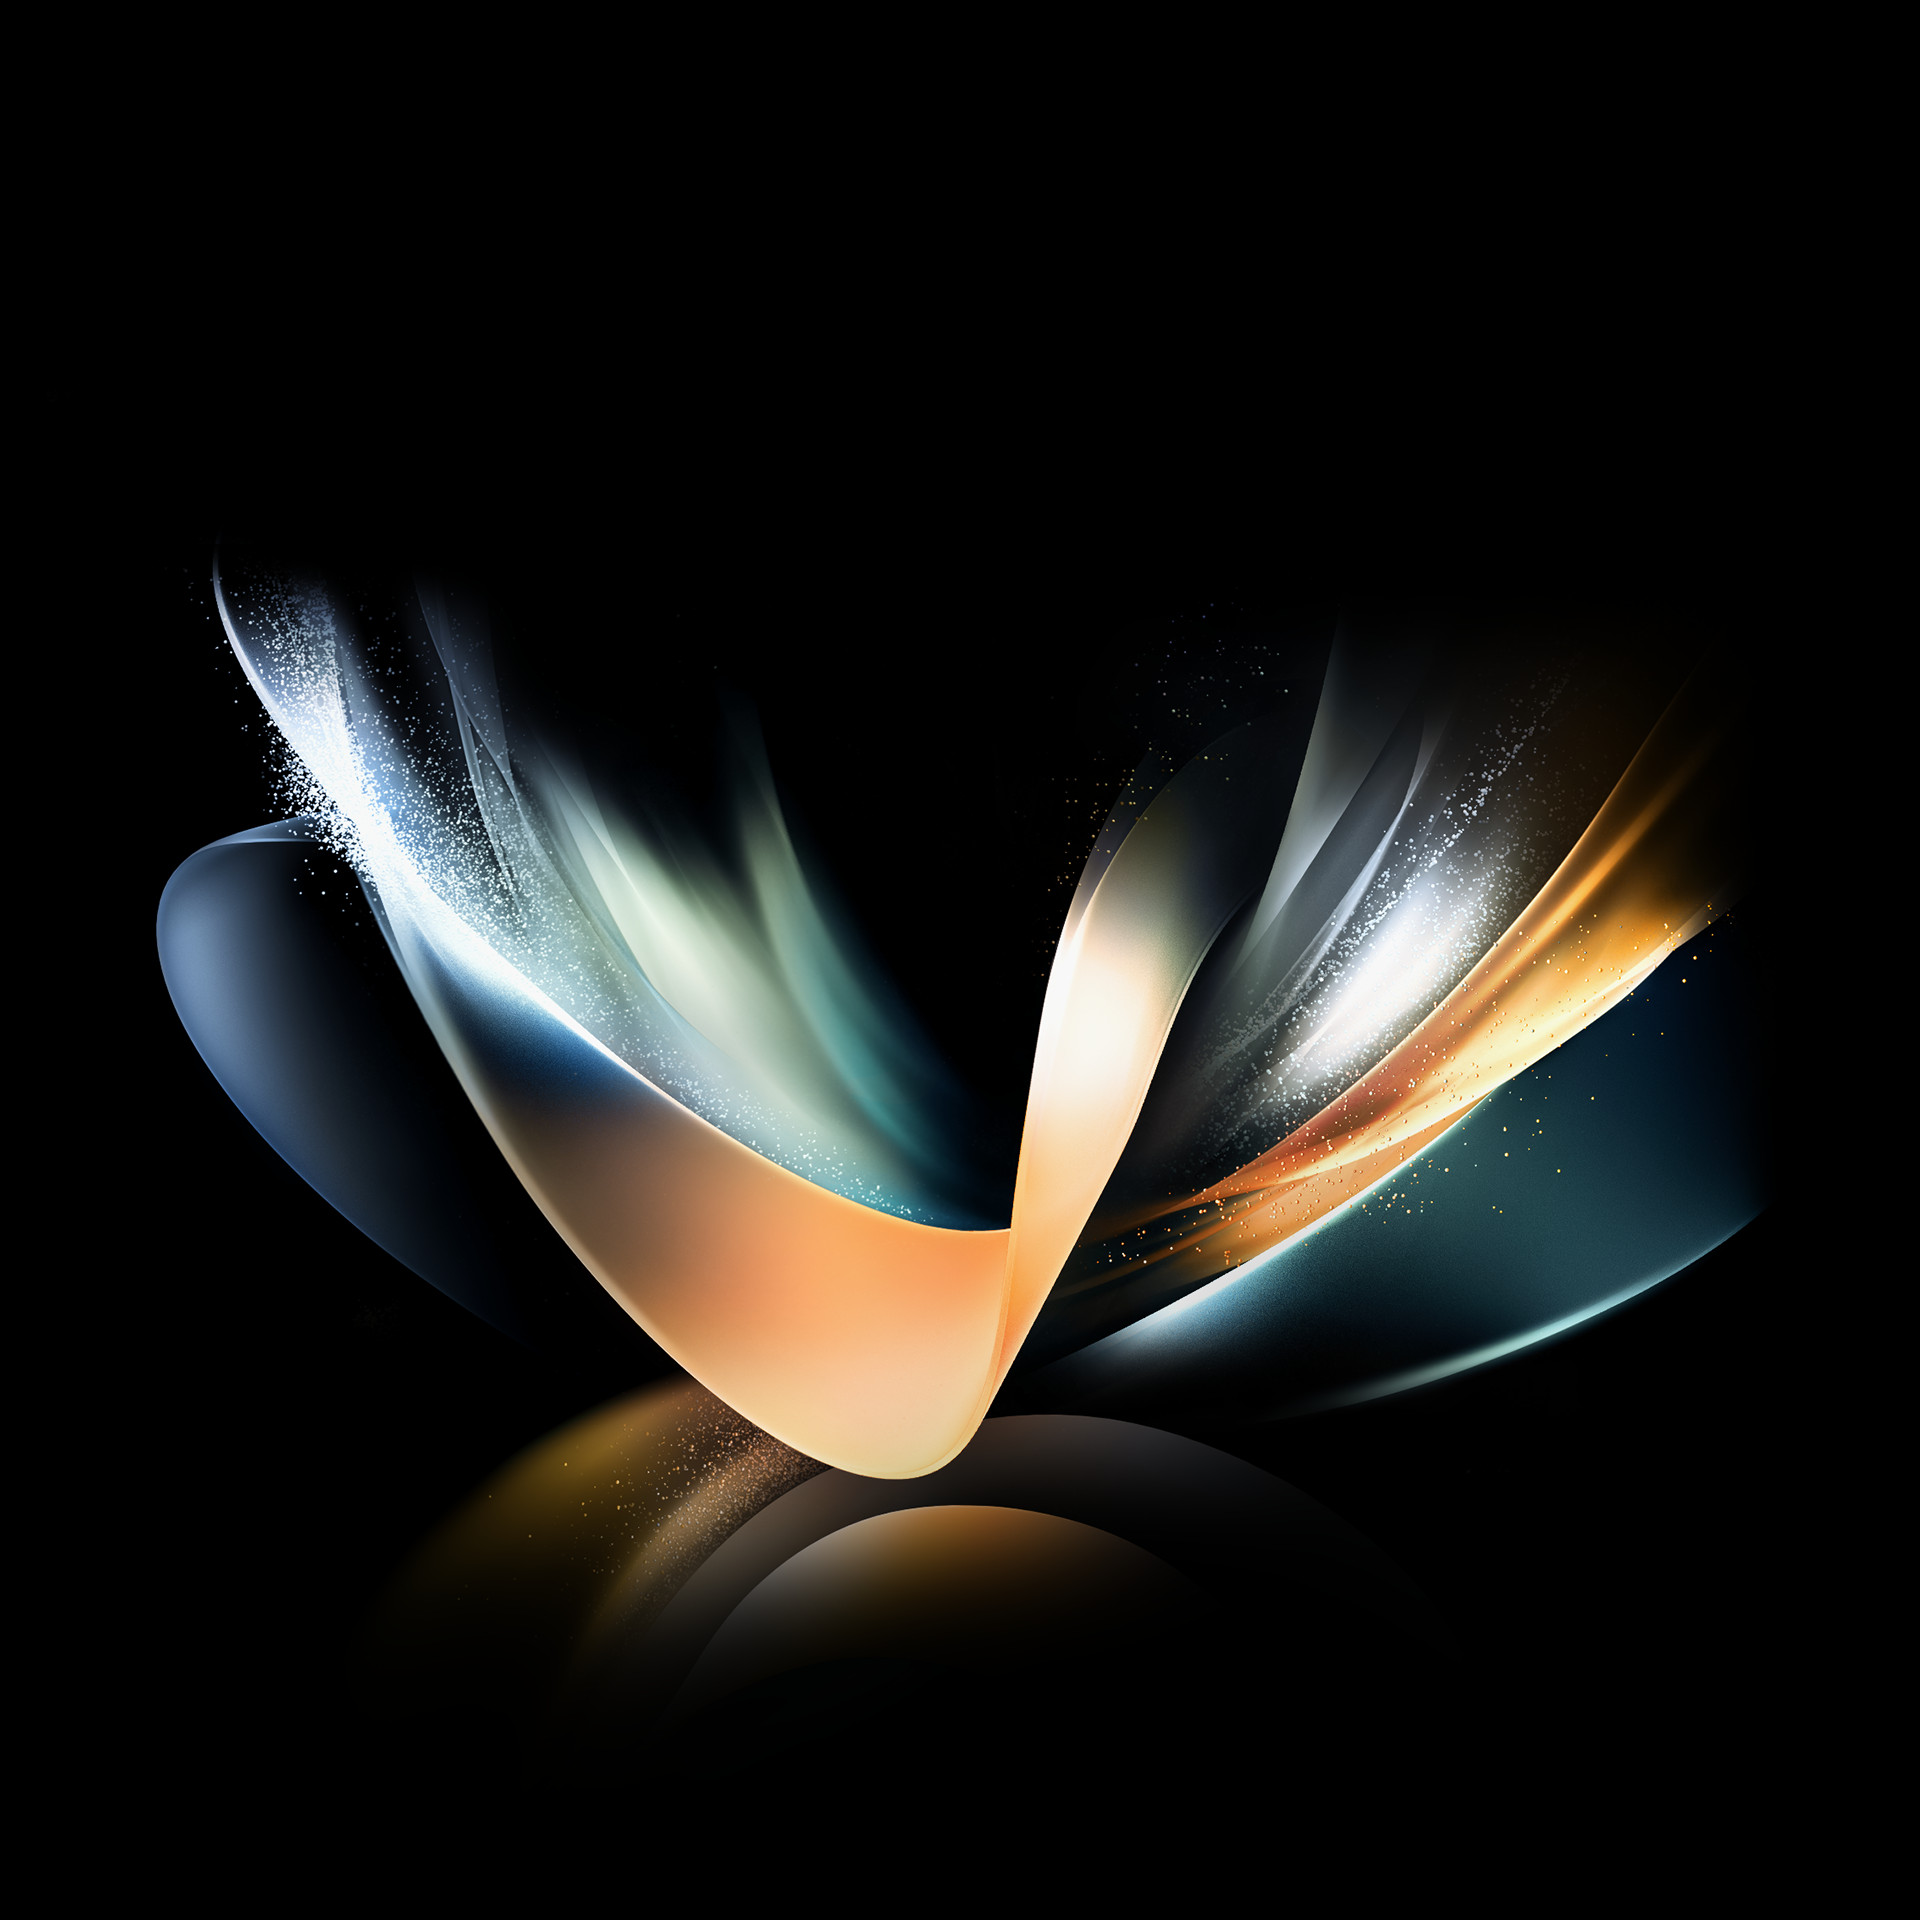 Samsung wallpapers: Download them all here - Android Authority